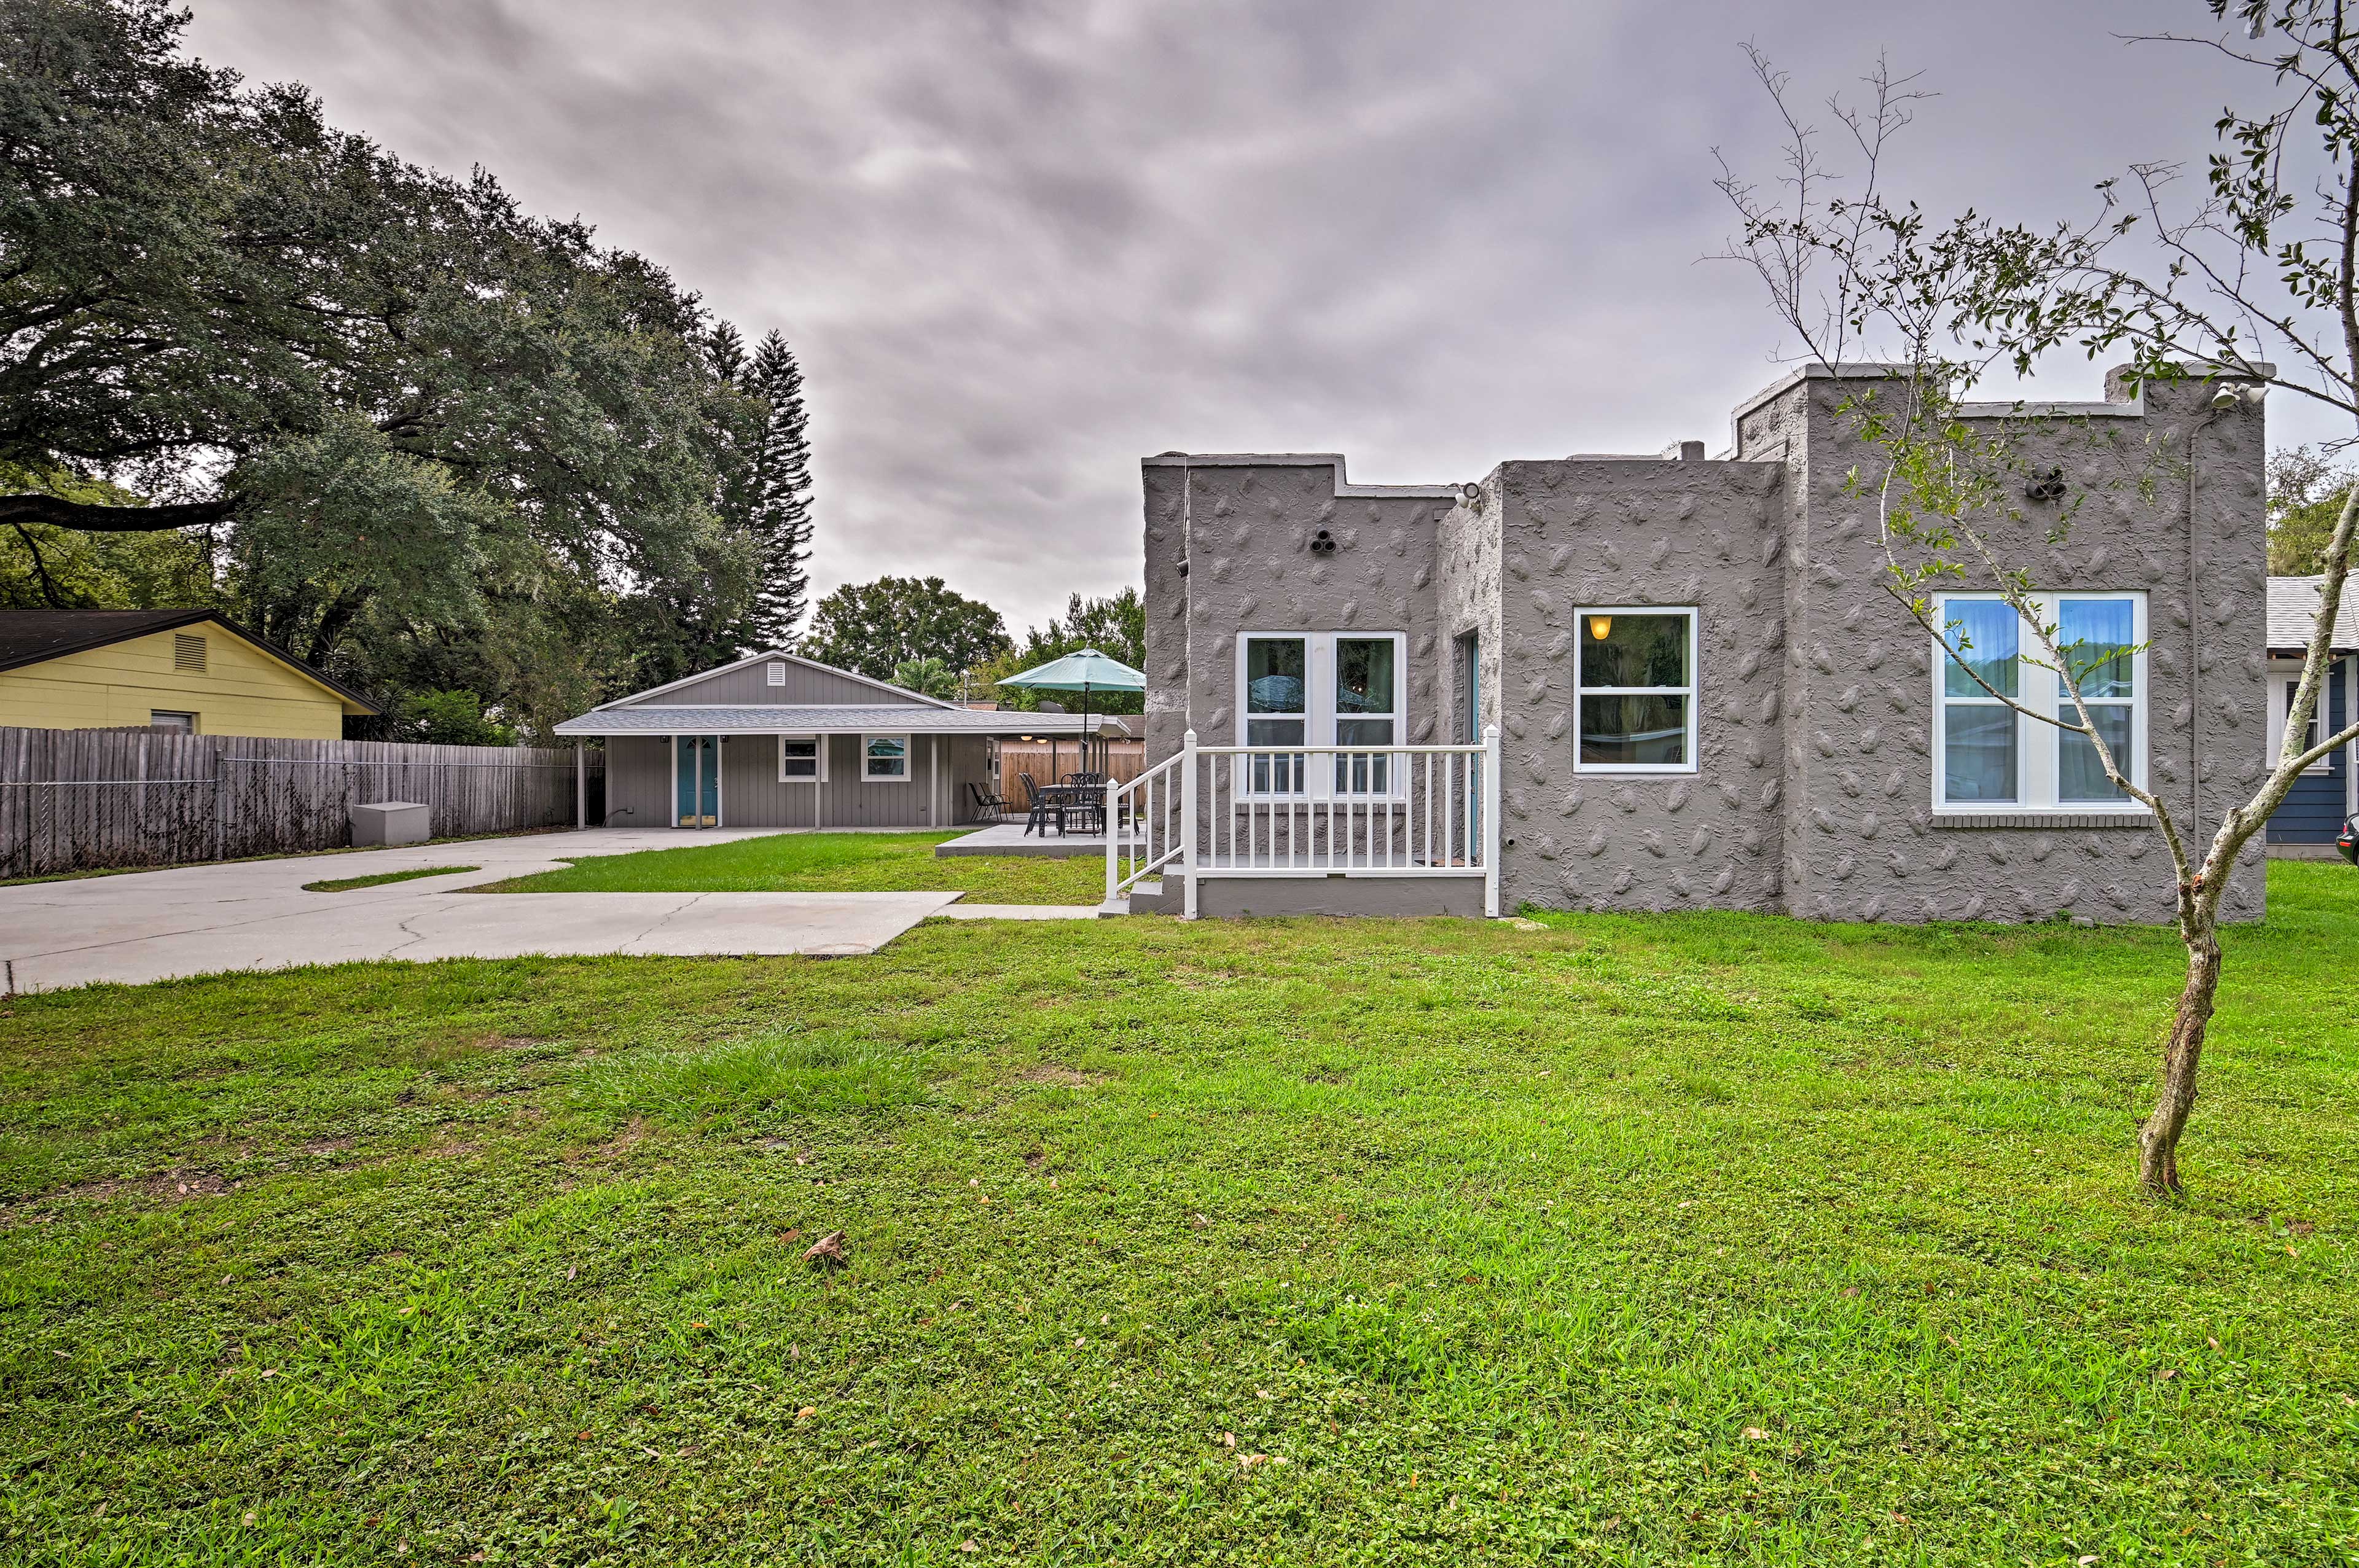 This bungalow is tucked away, just a short walk from Downtown Winter Garden.